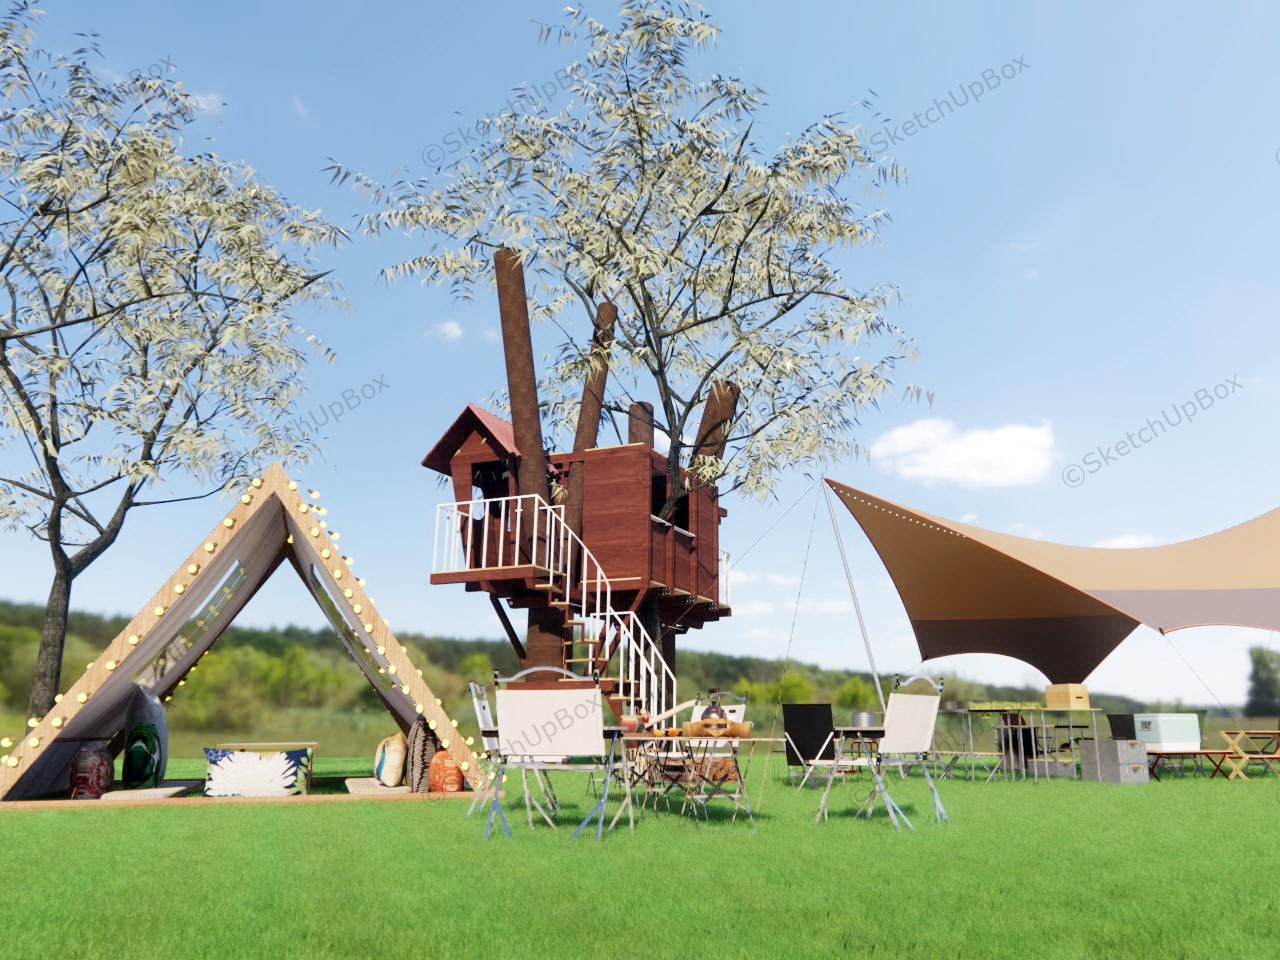 Treehouse Glamping Design sketchup model preview - SketchupBox